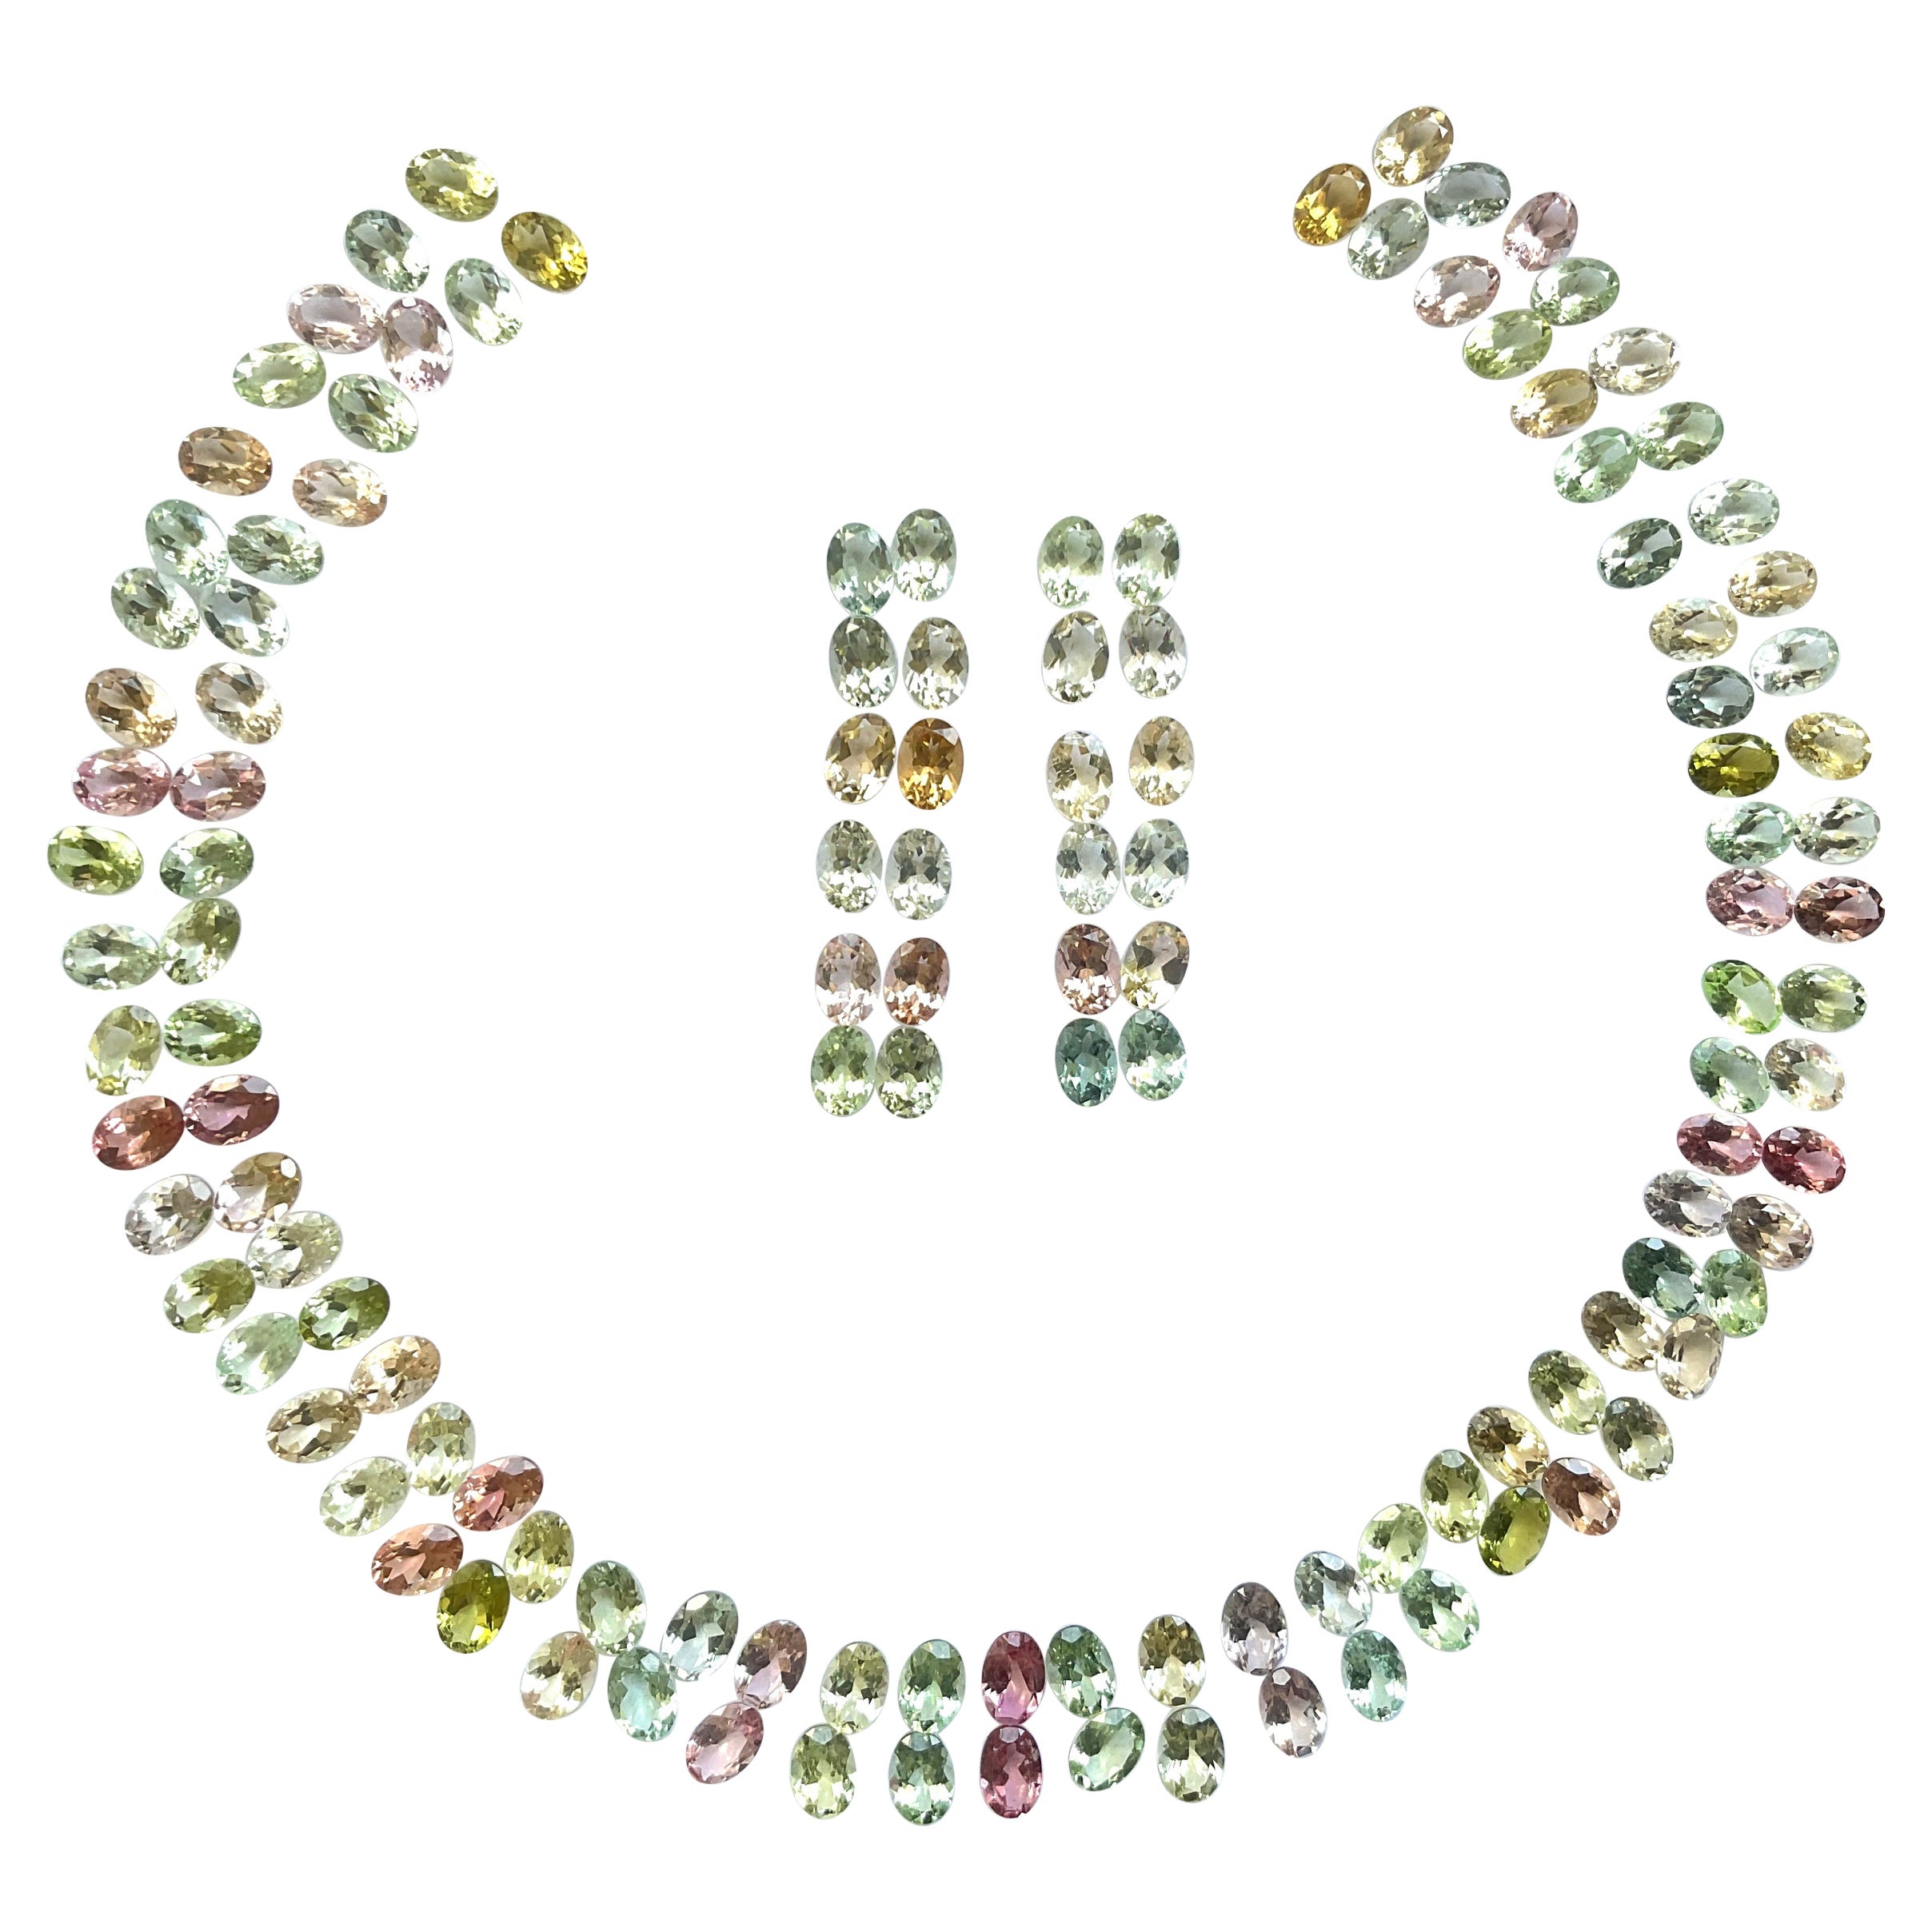 98.15 Carats Oval Tourmaline Layout Suite Faceted Cut Stones Natural Gems For Sale